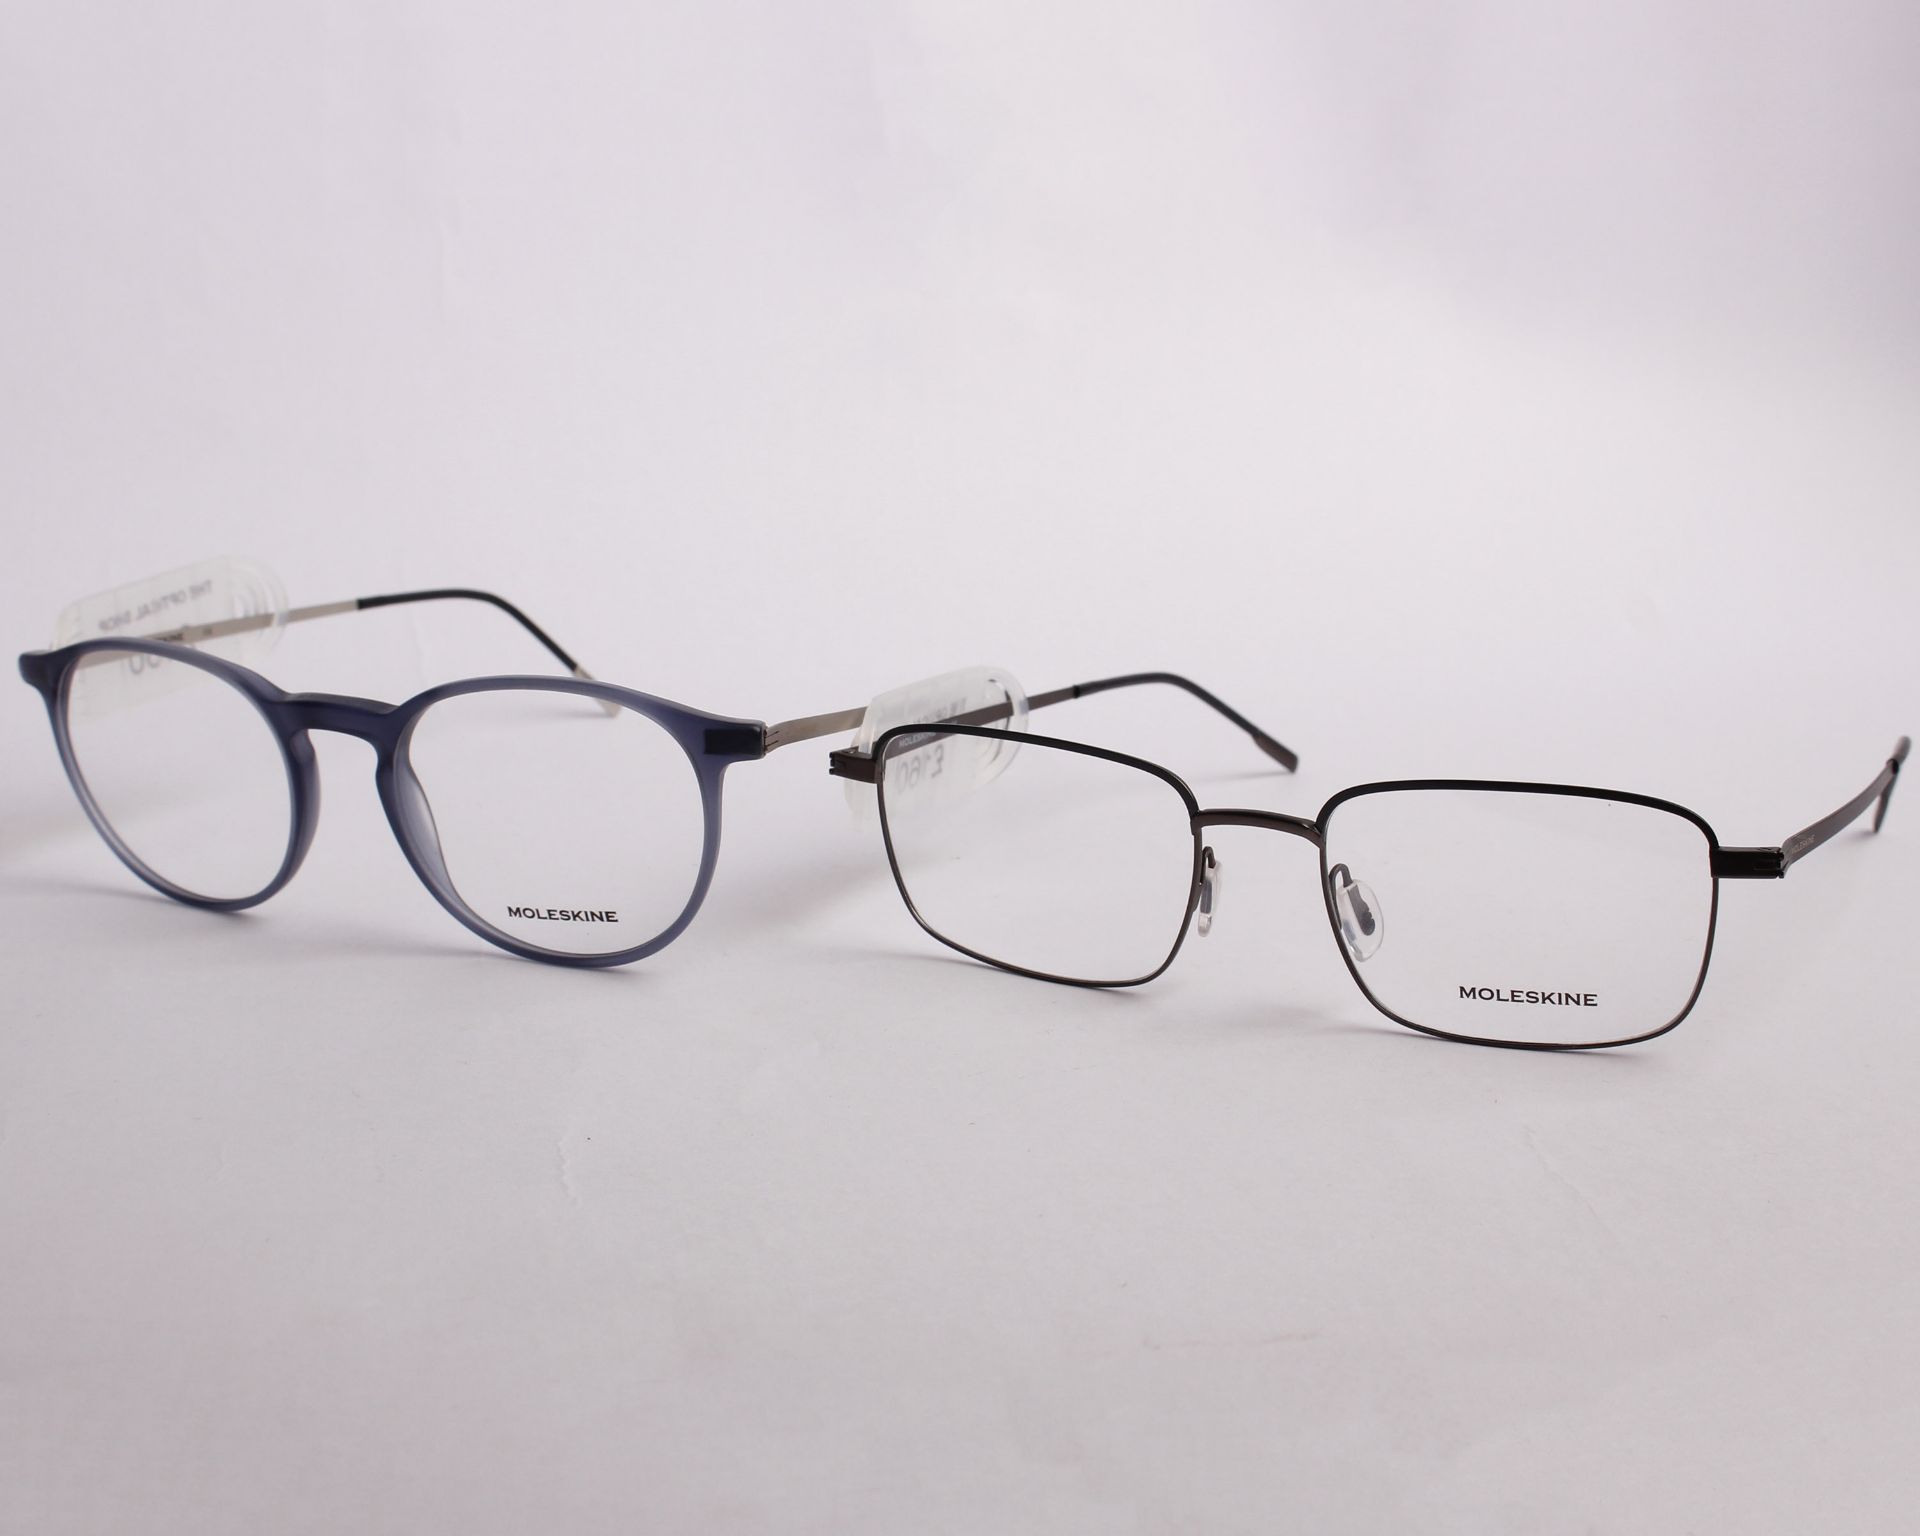 Two pairs of as new Moleskine glasses frames with clear glass (RRP £160 each).